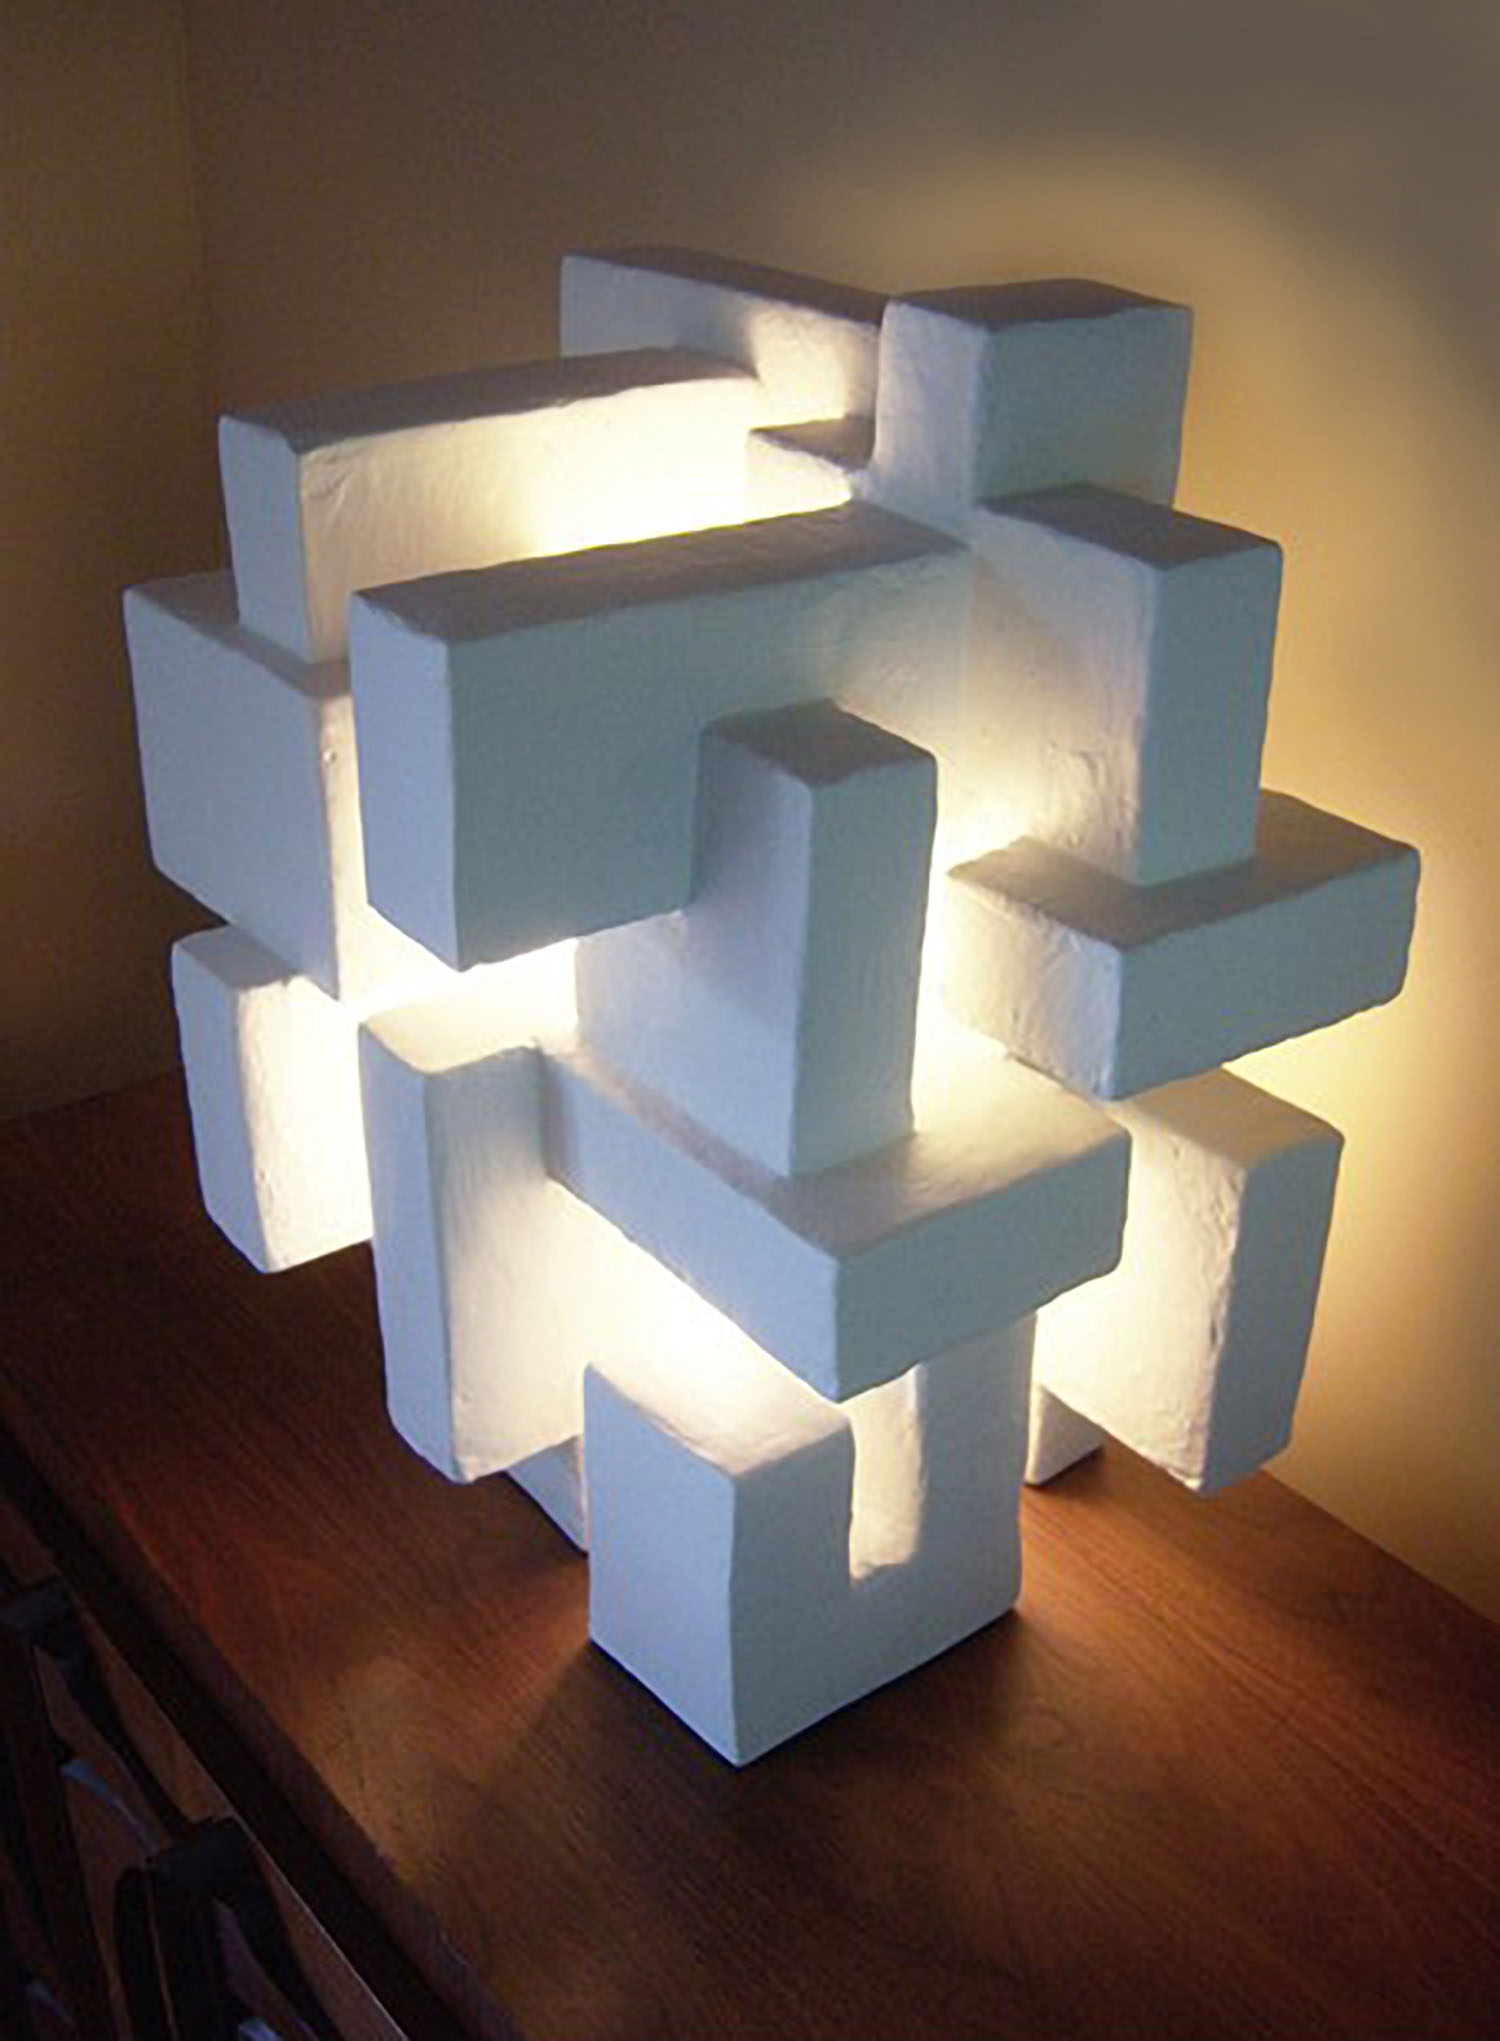 ABITARE LIGHT SCULPTURE, commission for hotel project, New York